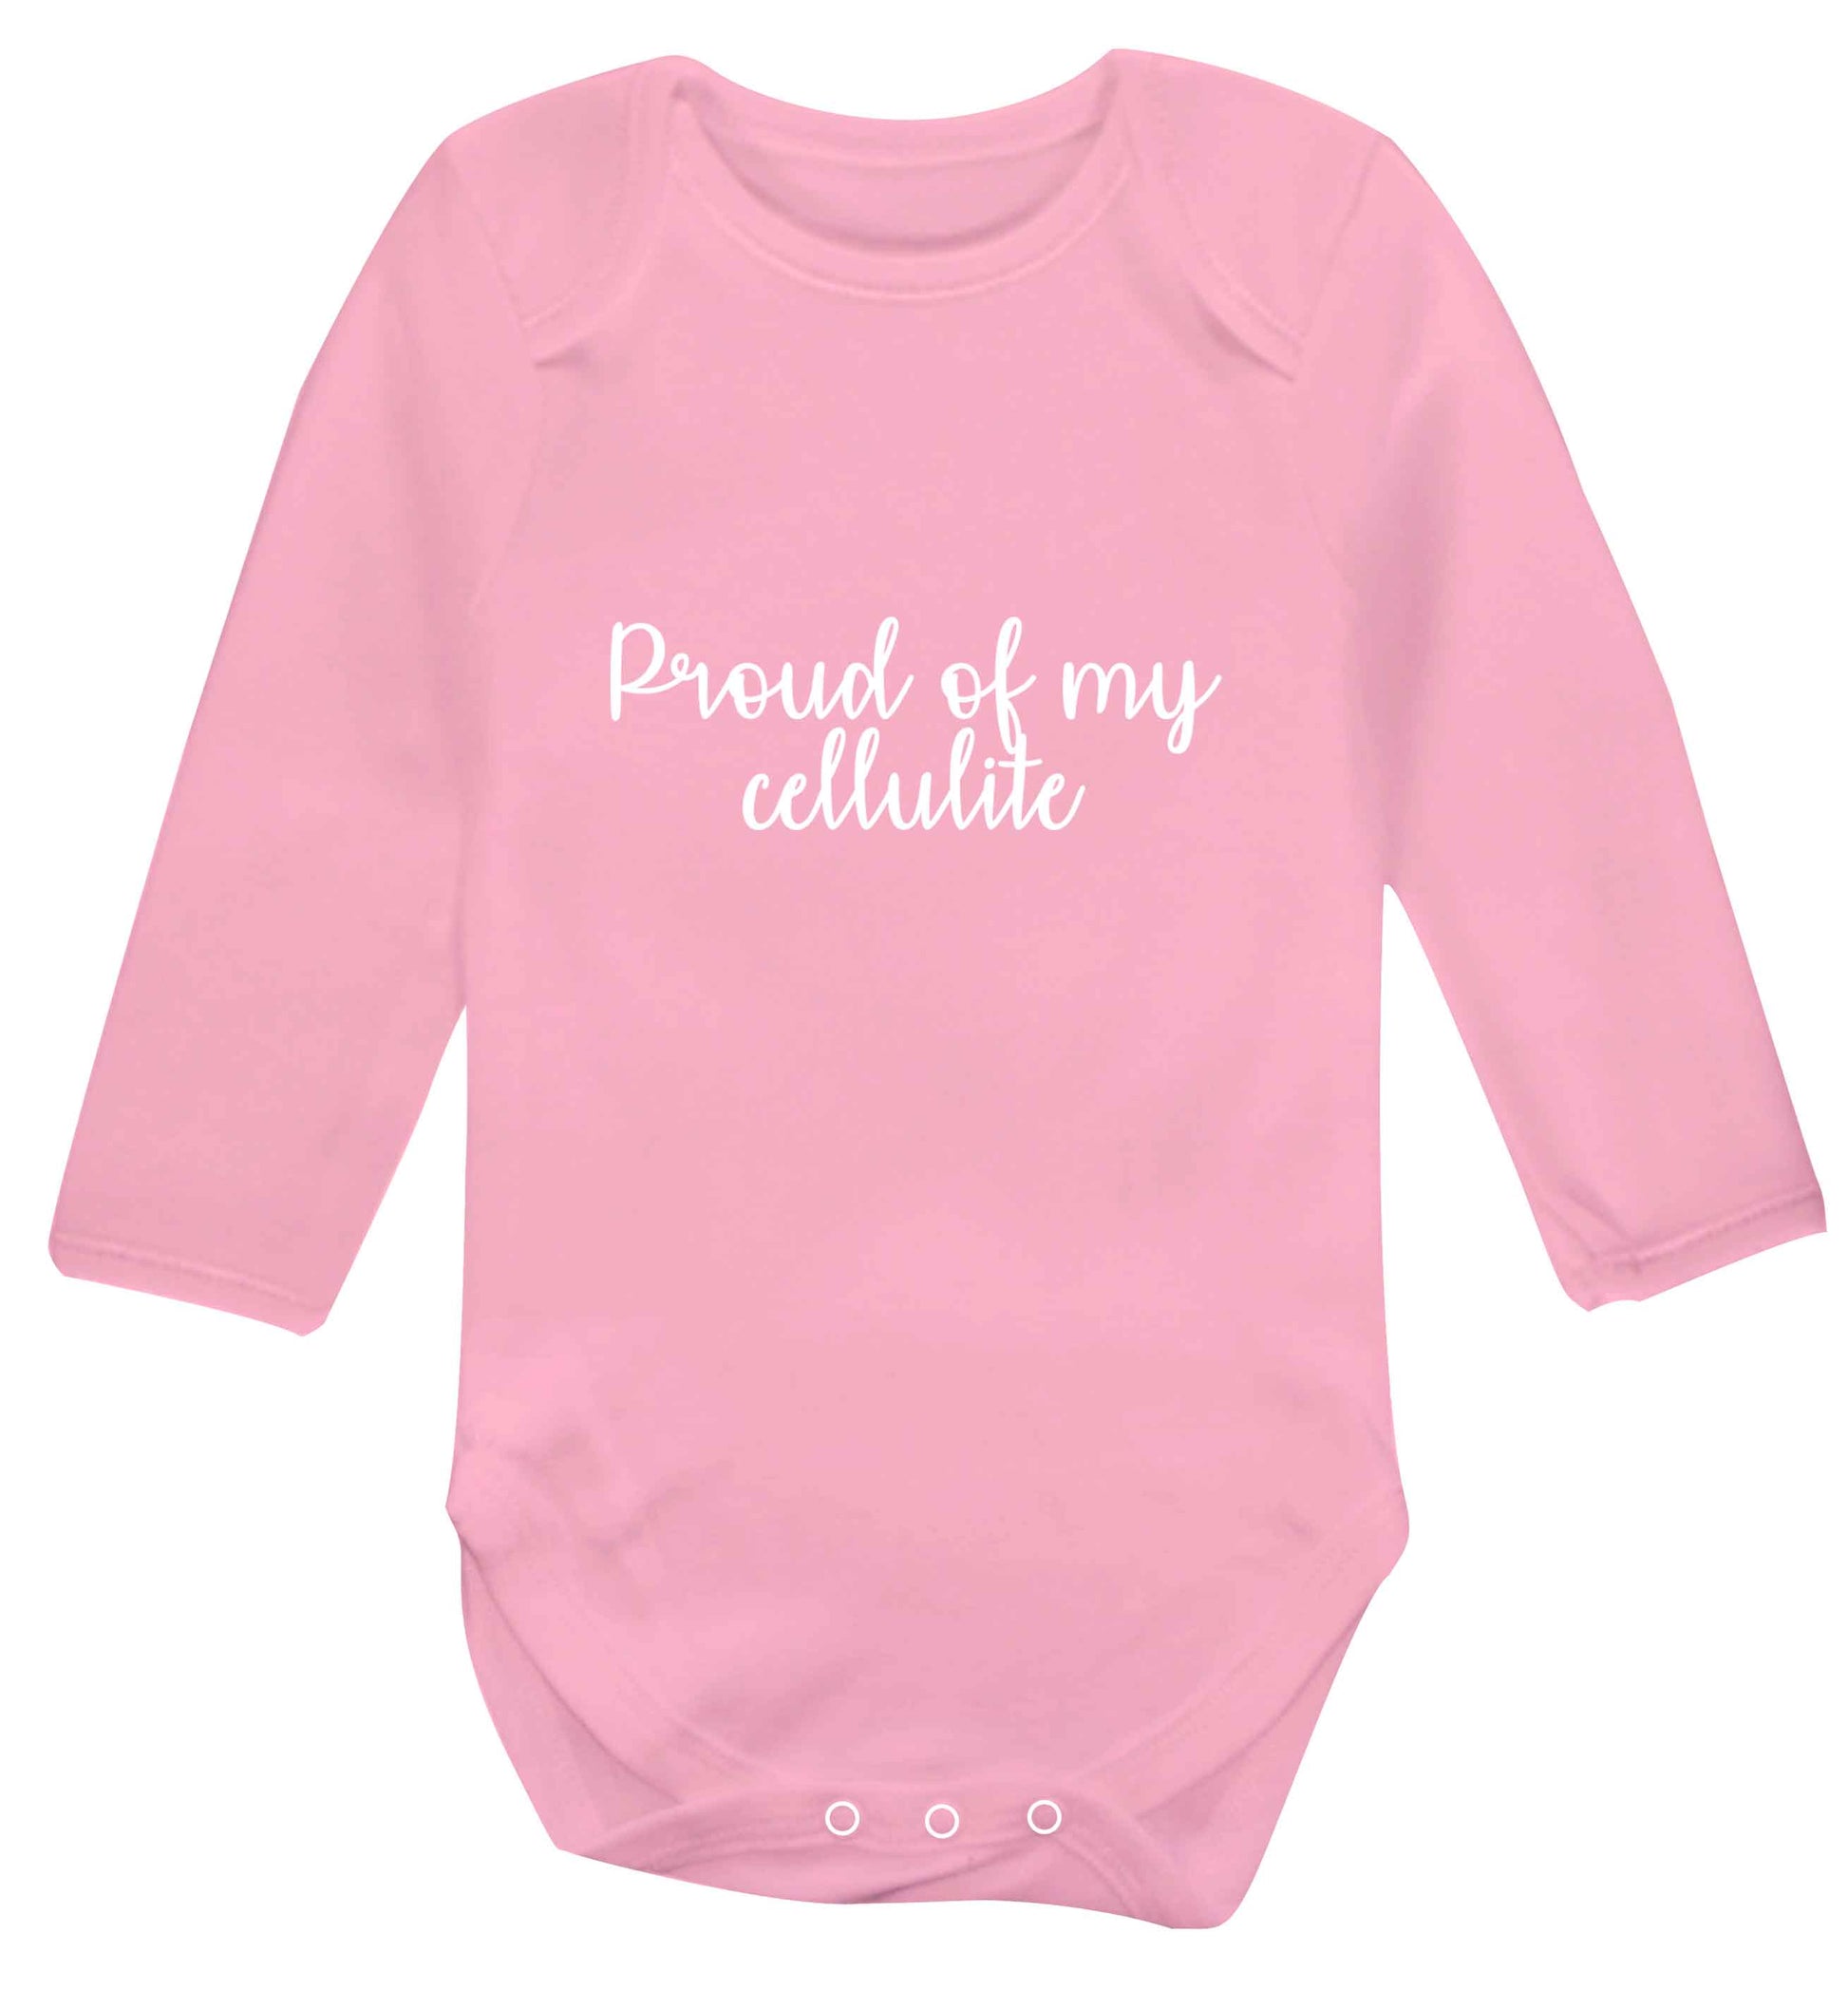 Proud of my cellulite baby vest long sleeved pale pink 6-12 months